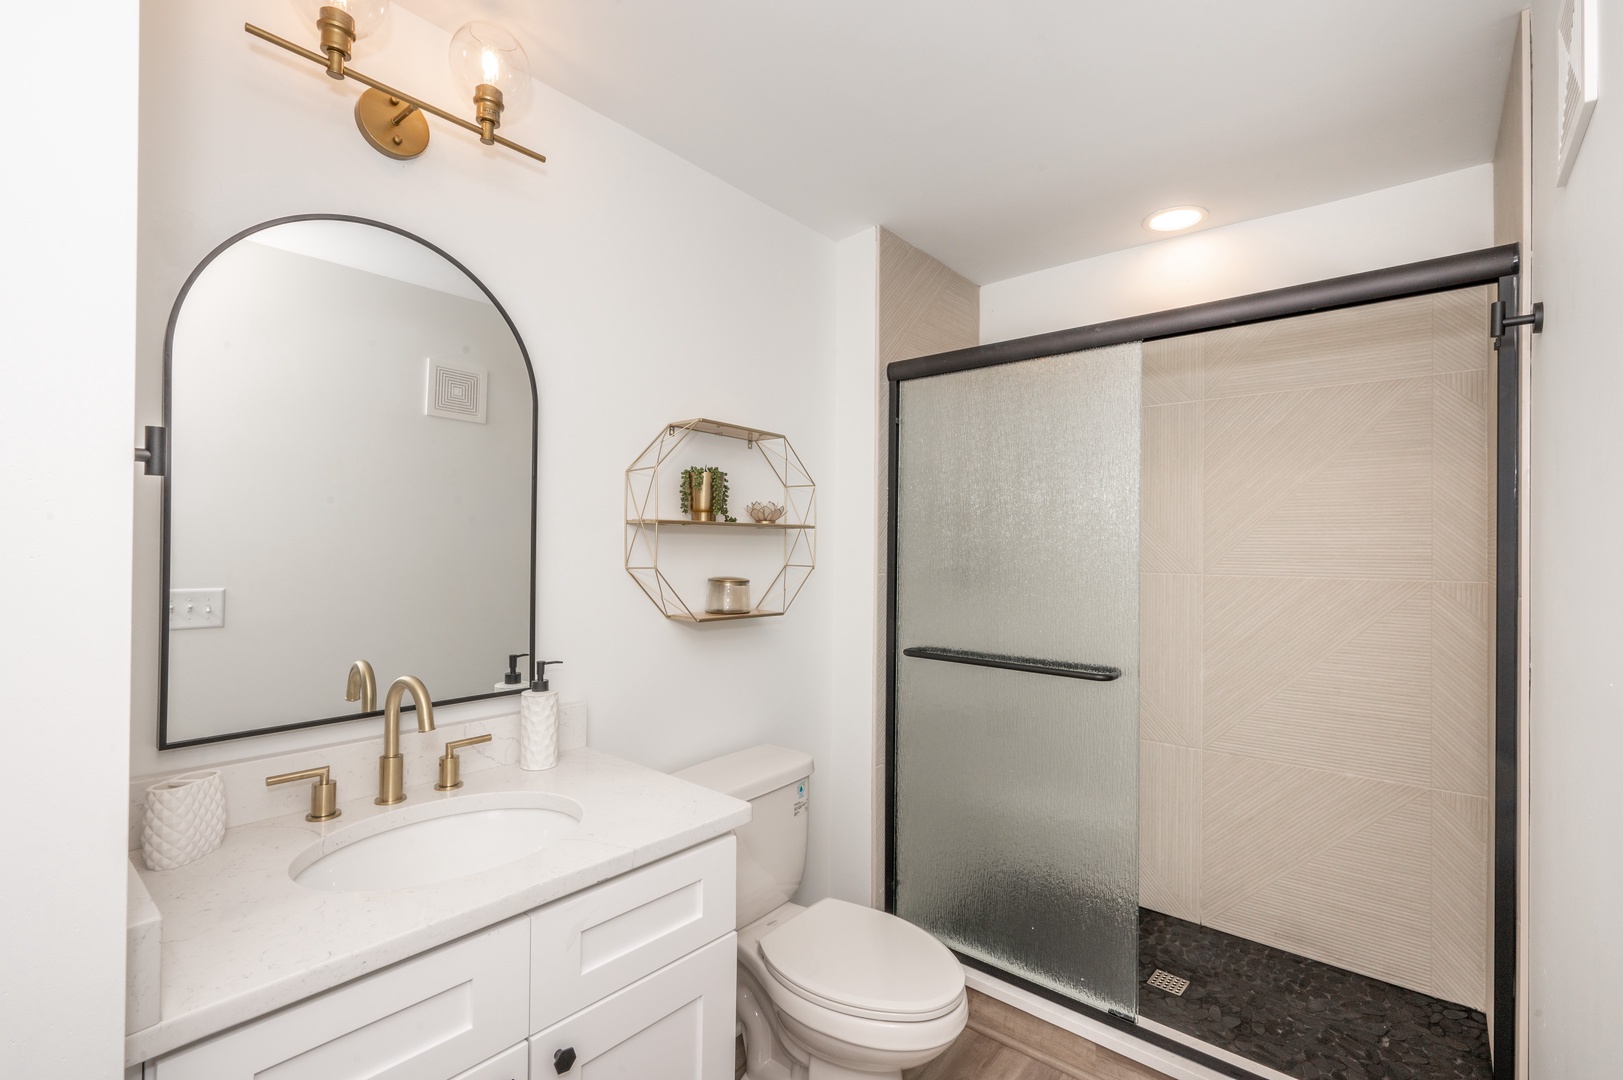 Unit 101: The chic bathroom offers a single vanity and spa-like glass shower